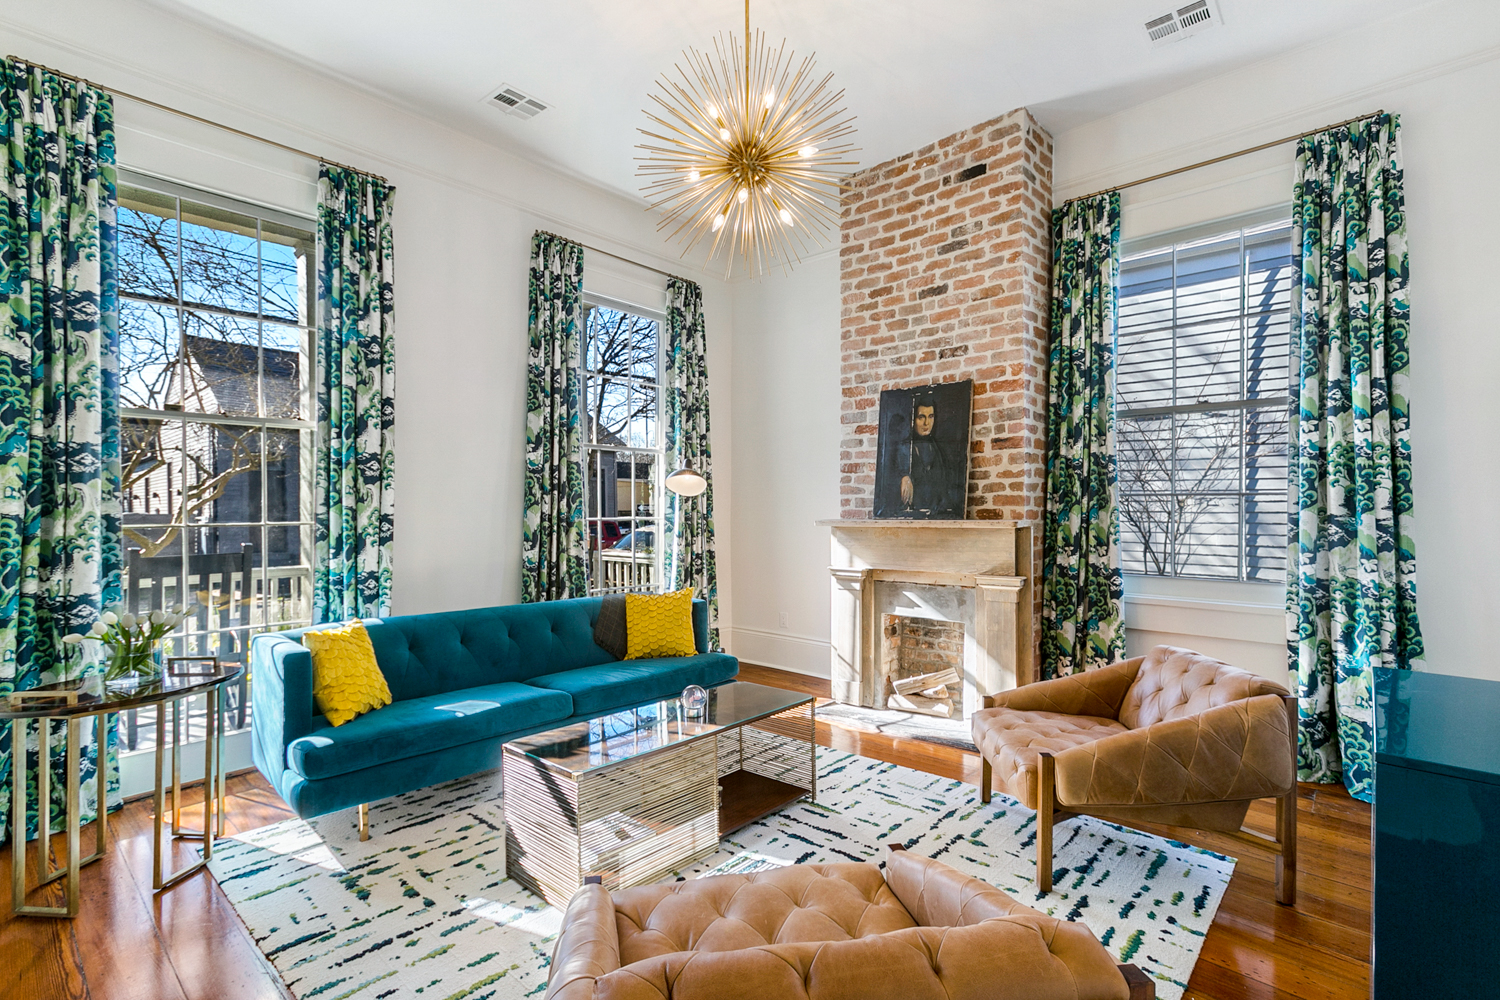  Beautiful center hall in a great location in the Irish Channel. Old world New Orleans charm with modern amenities. Great outdoor space with a pool! Walk to many shops, restaurants and coffee shops on Magazine St. 